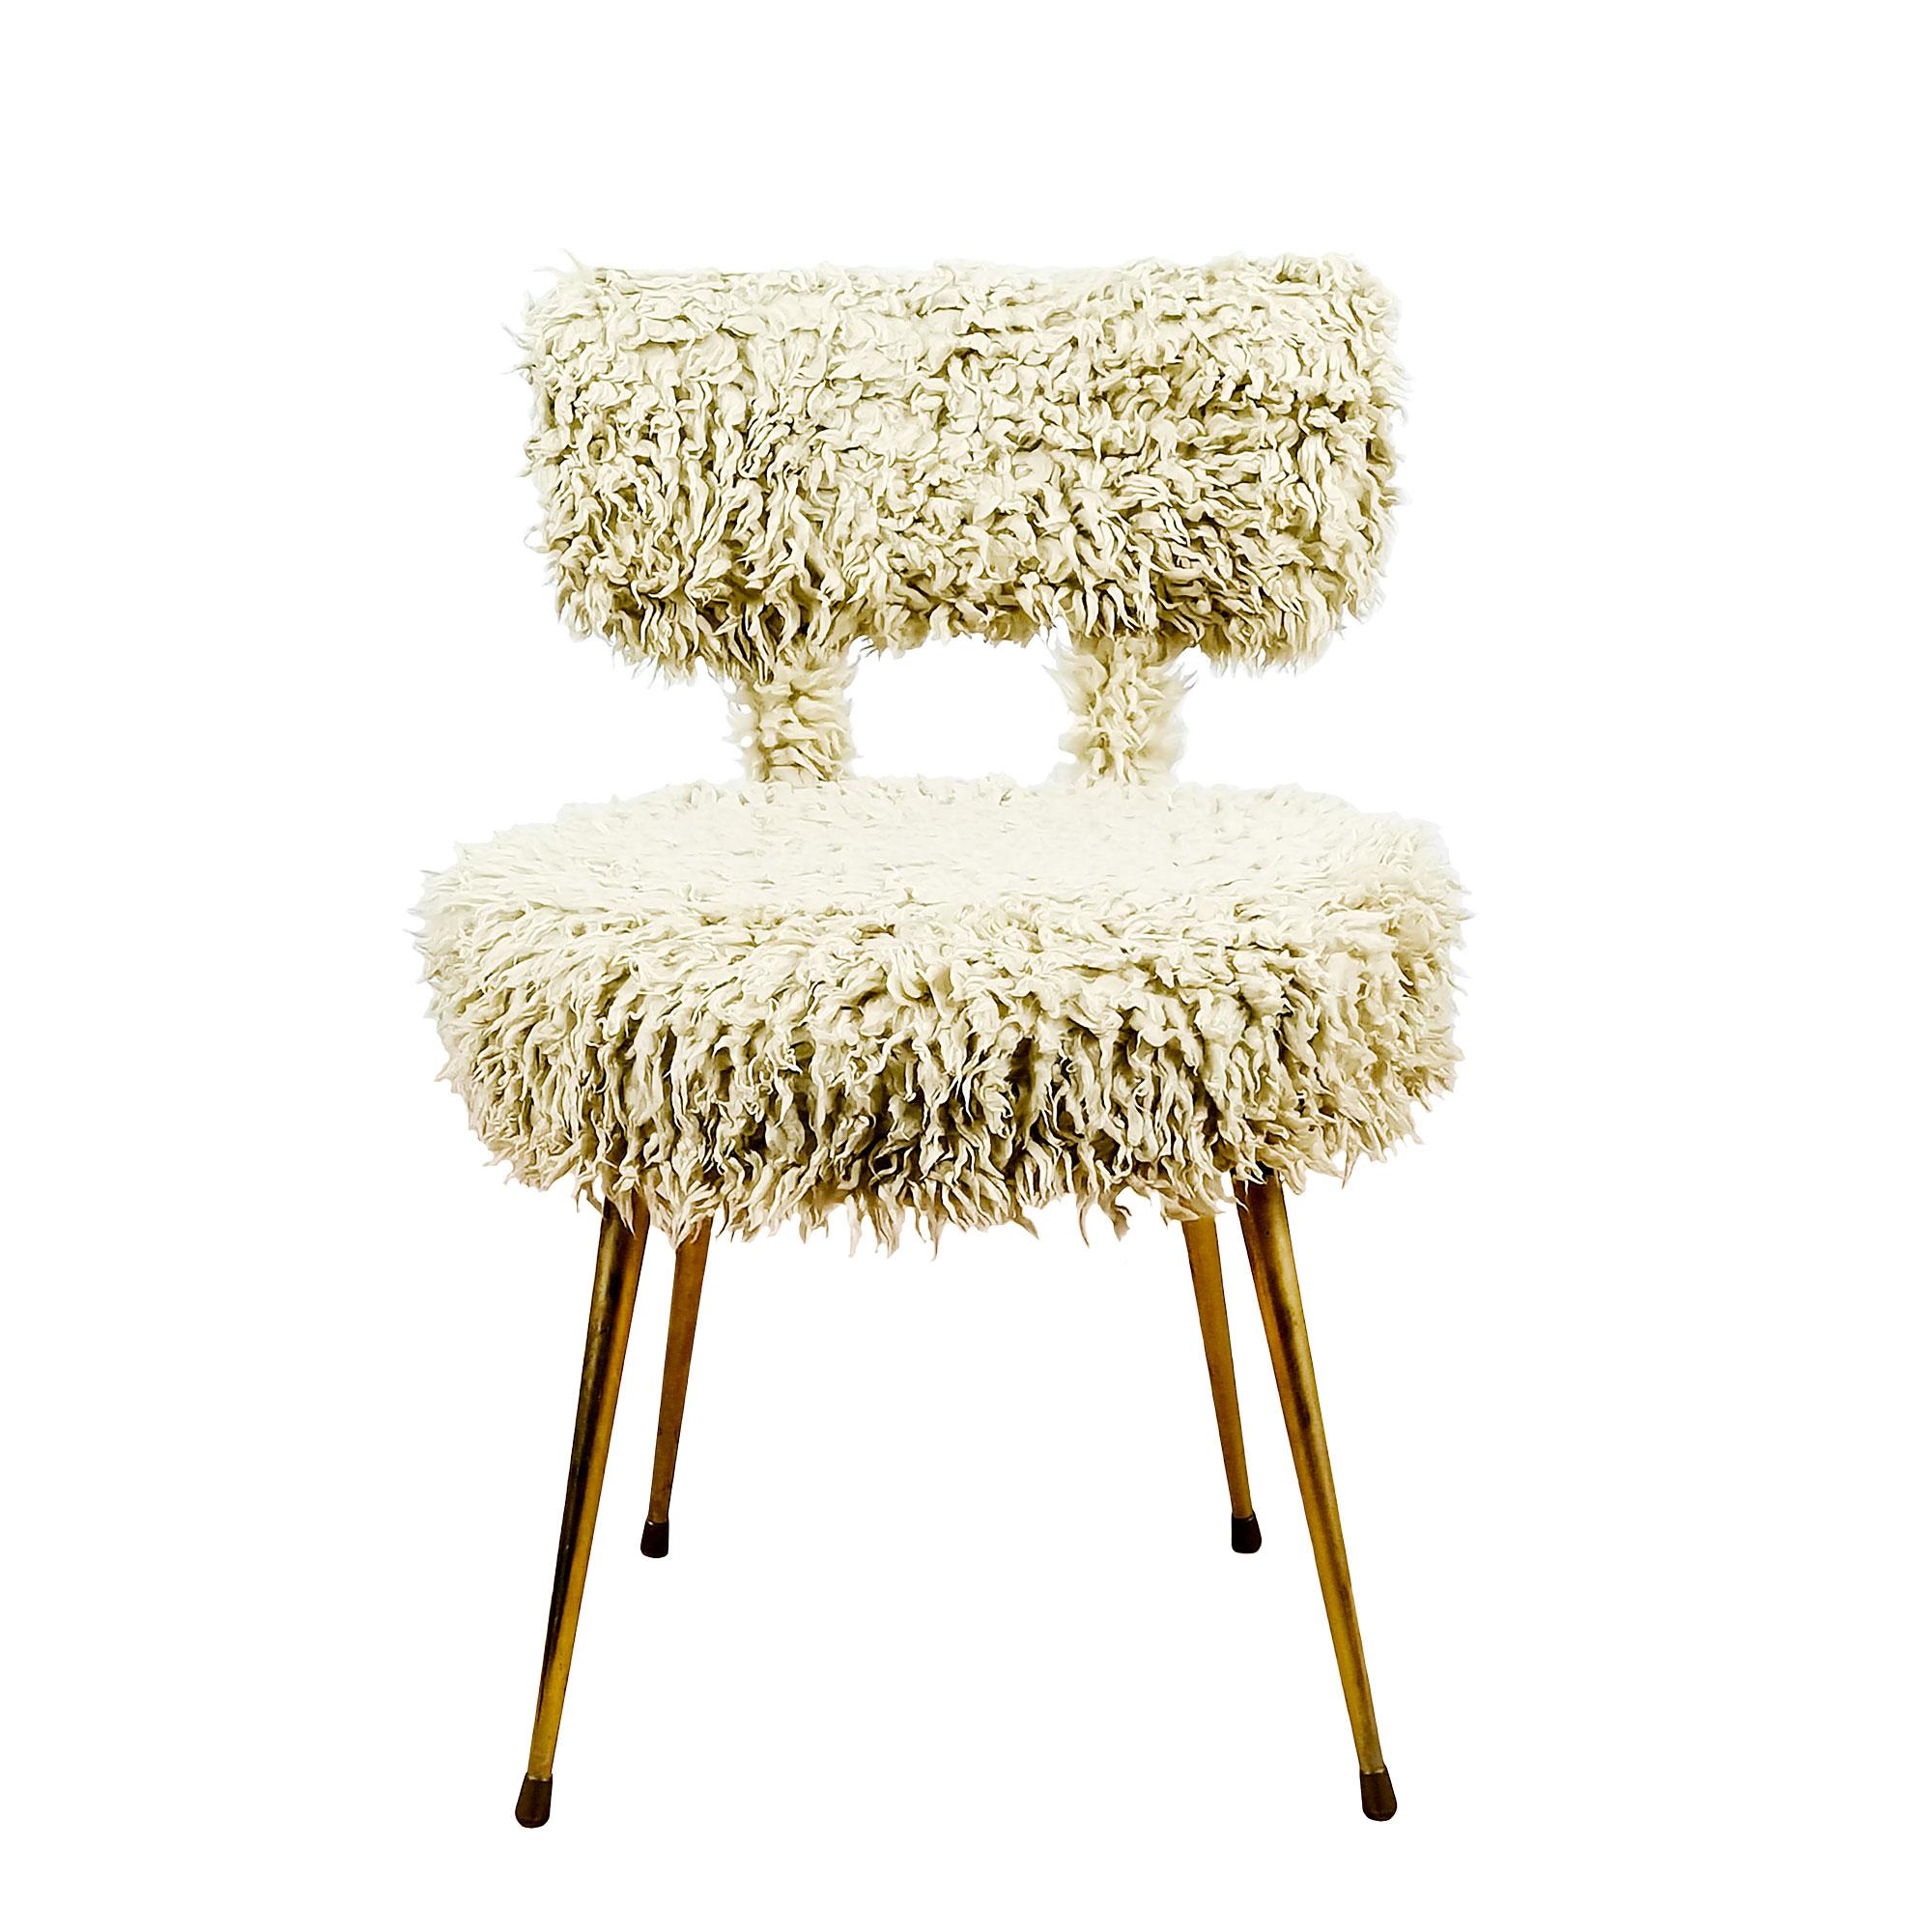 Pair of small furry chairs with polished brass legs, wooden seats and backs filled with foam (new), original synthetic covers.

France c. 1960.